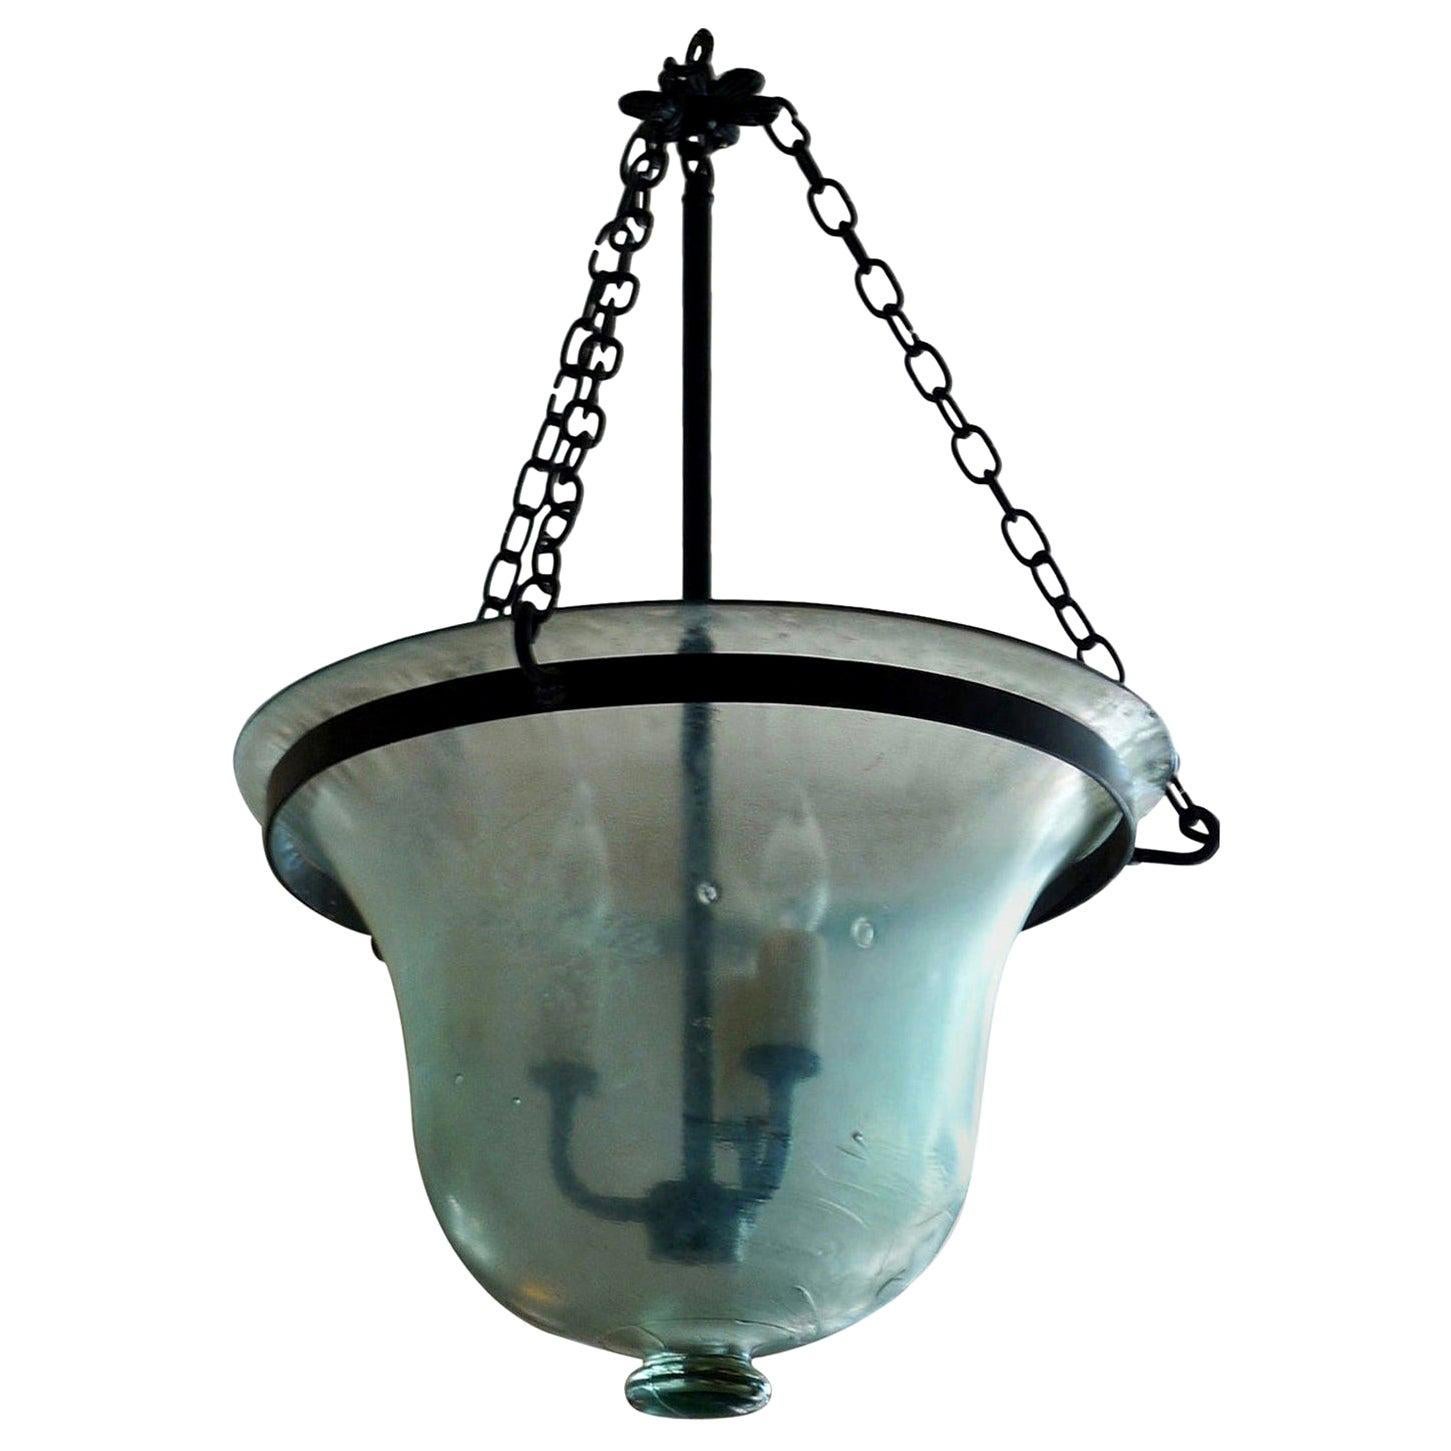 French 19th Century Bell Jar Pendant with Iron Chain Fittings and Frosted Glass